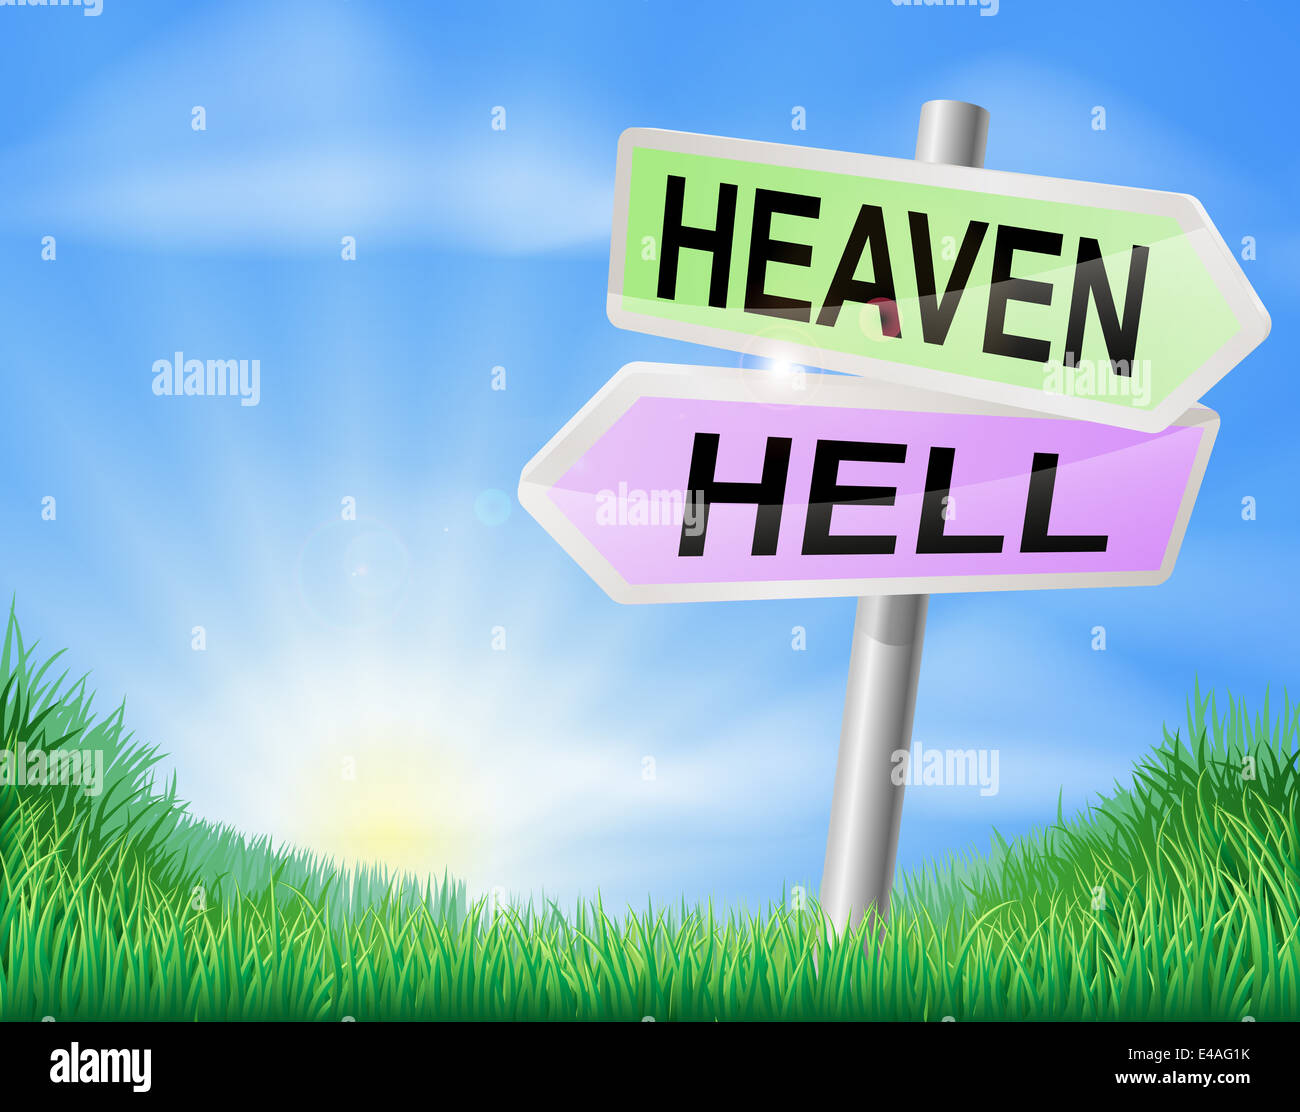 Heaven or hell sign concept with a choice to make Stock Photo